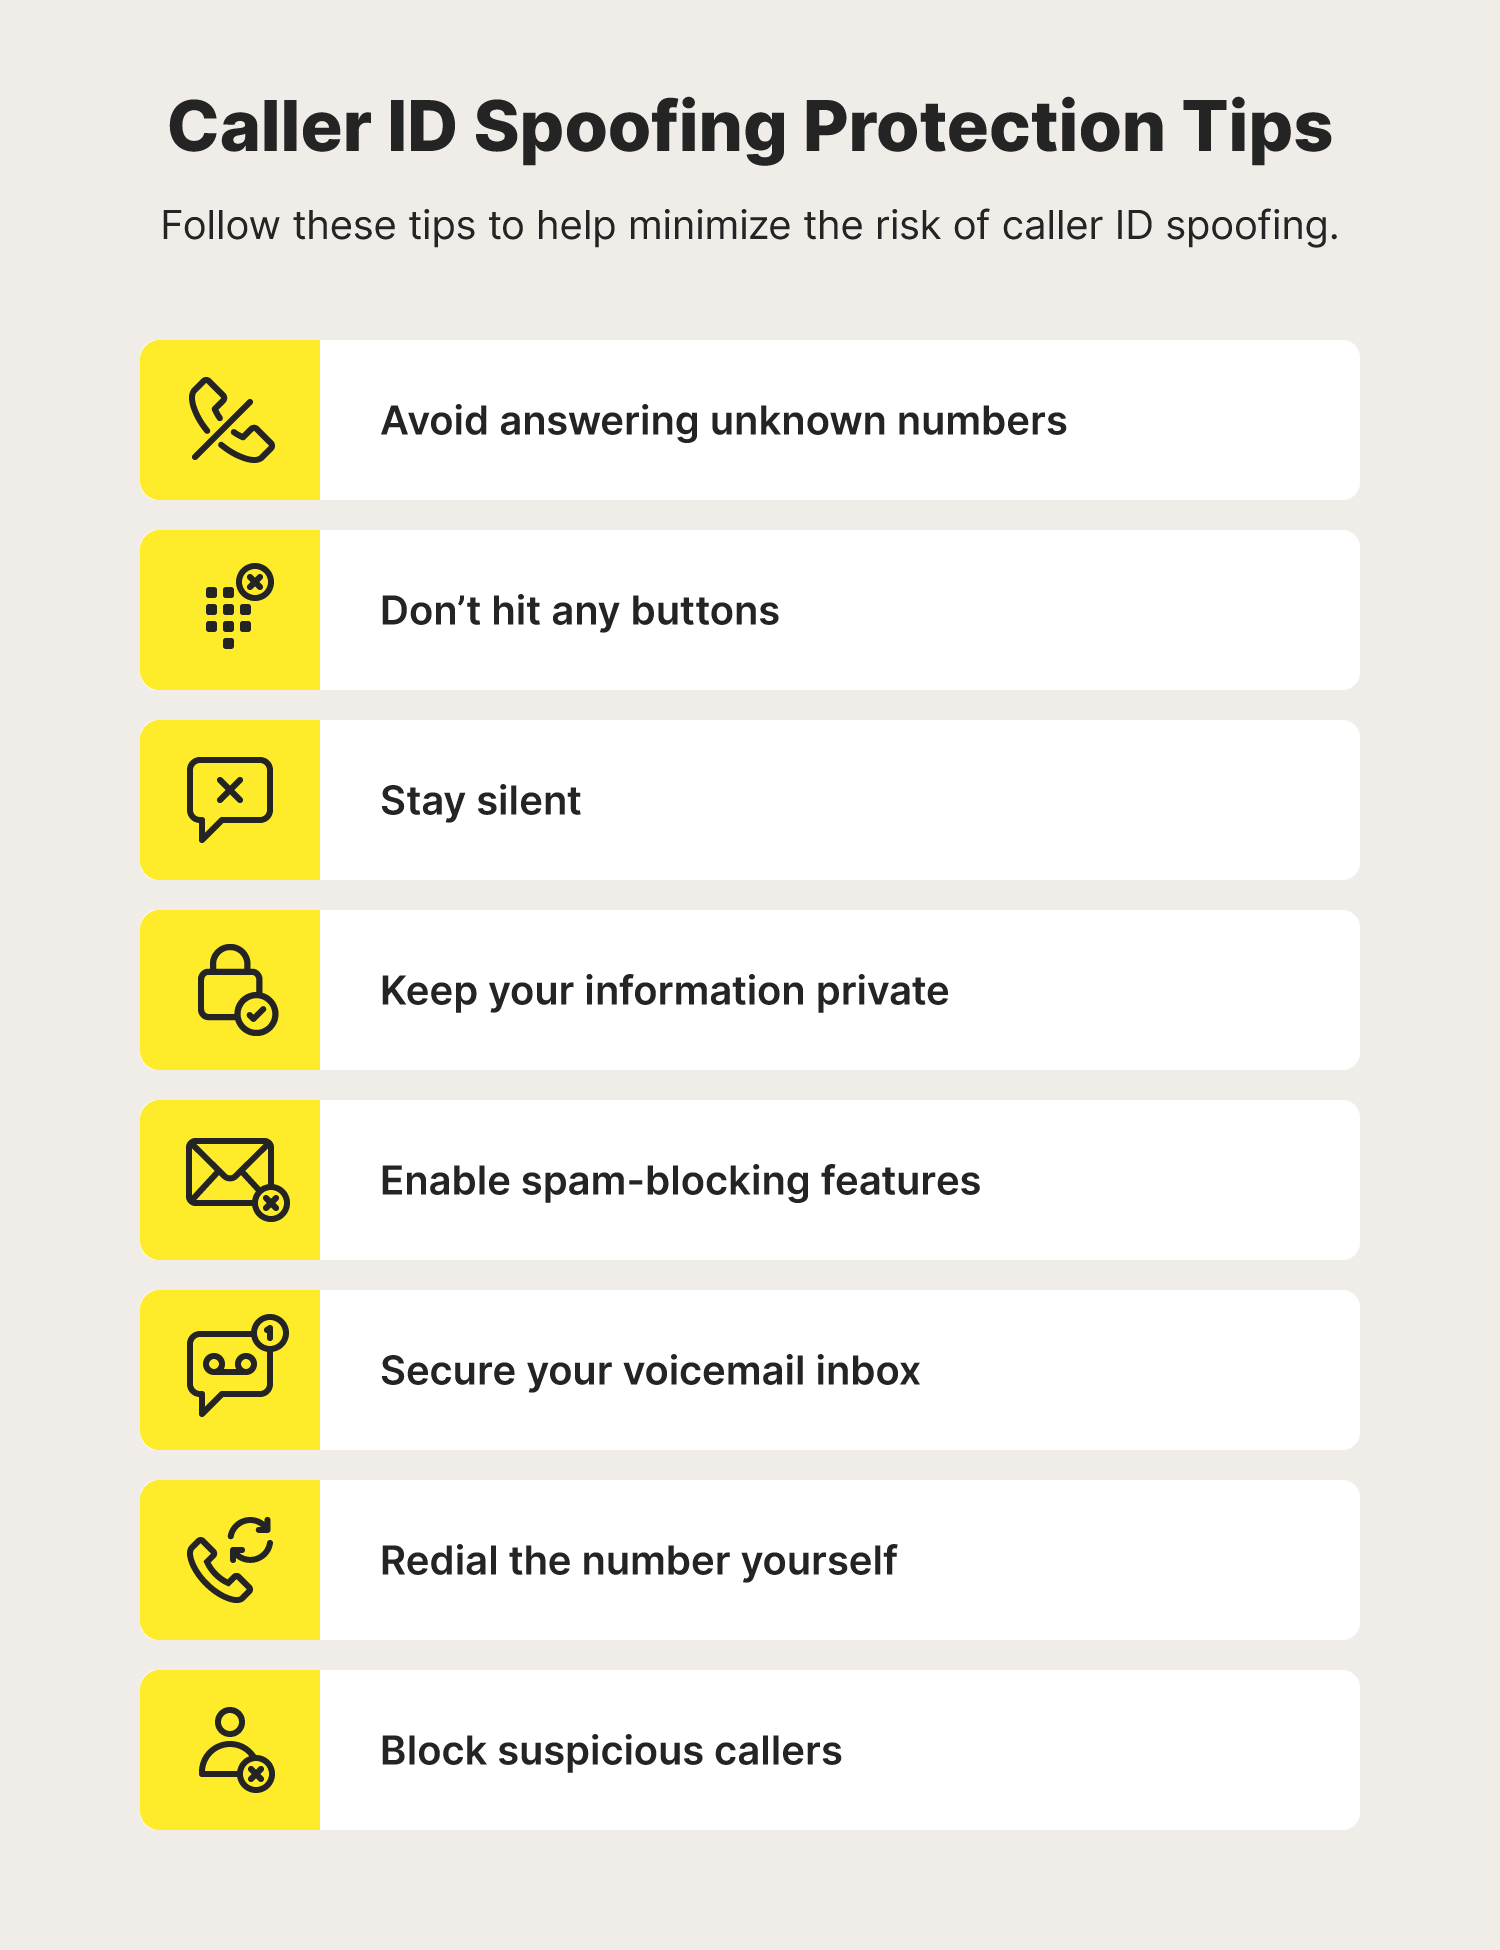 A graphic lists protection tips you can follow to help minimize the risk of caller ID spoofing.